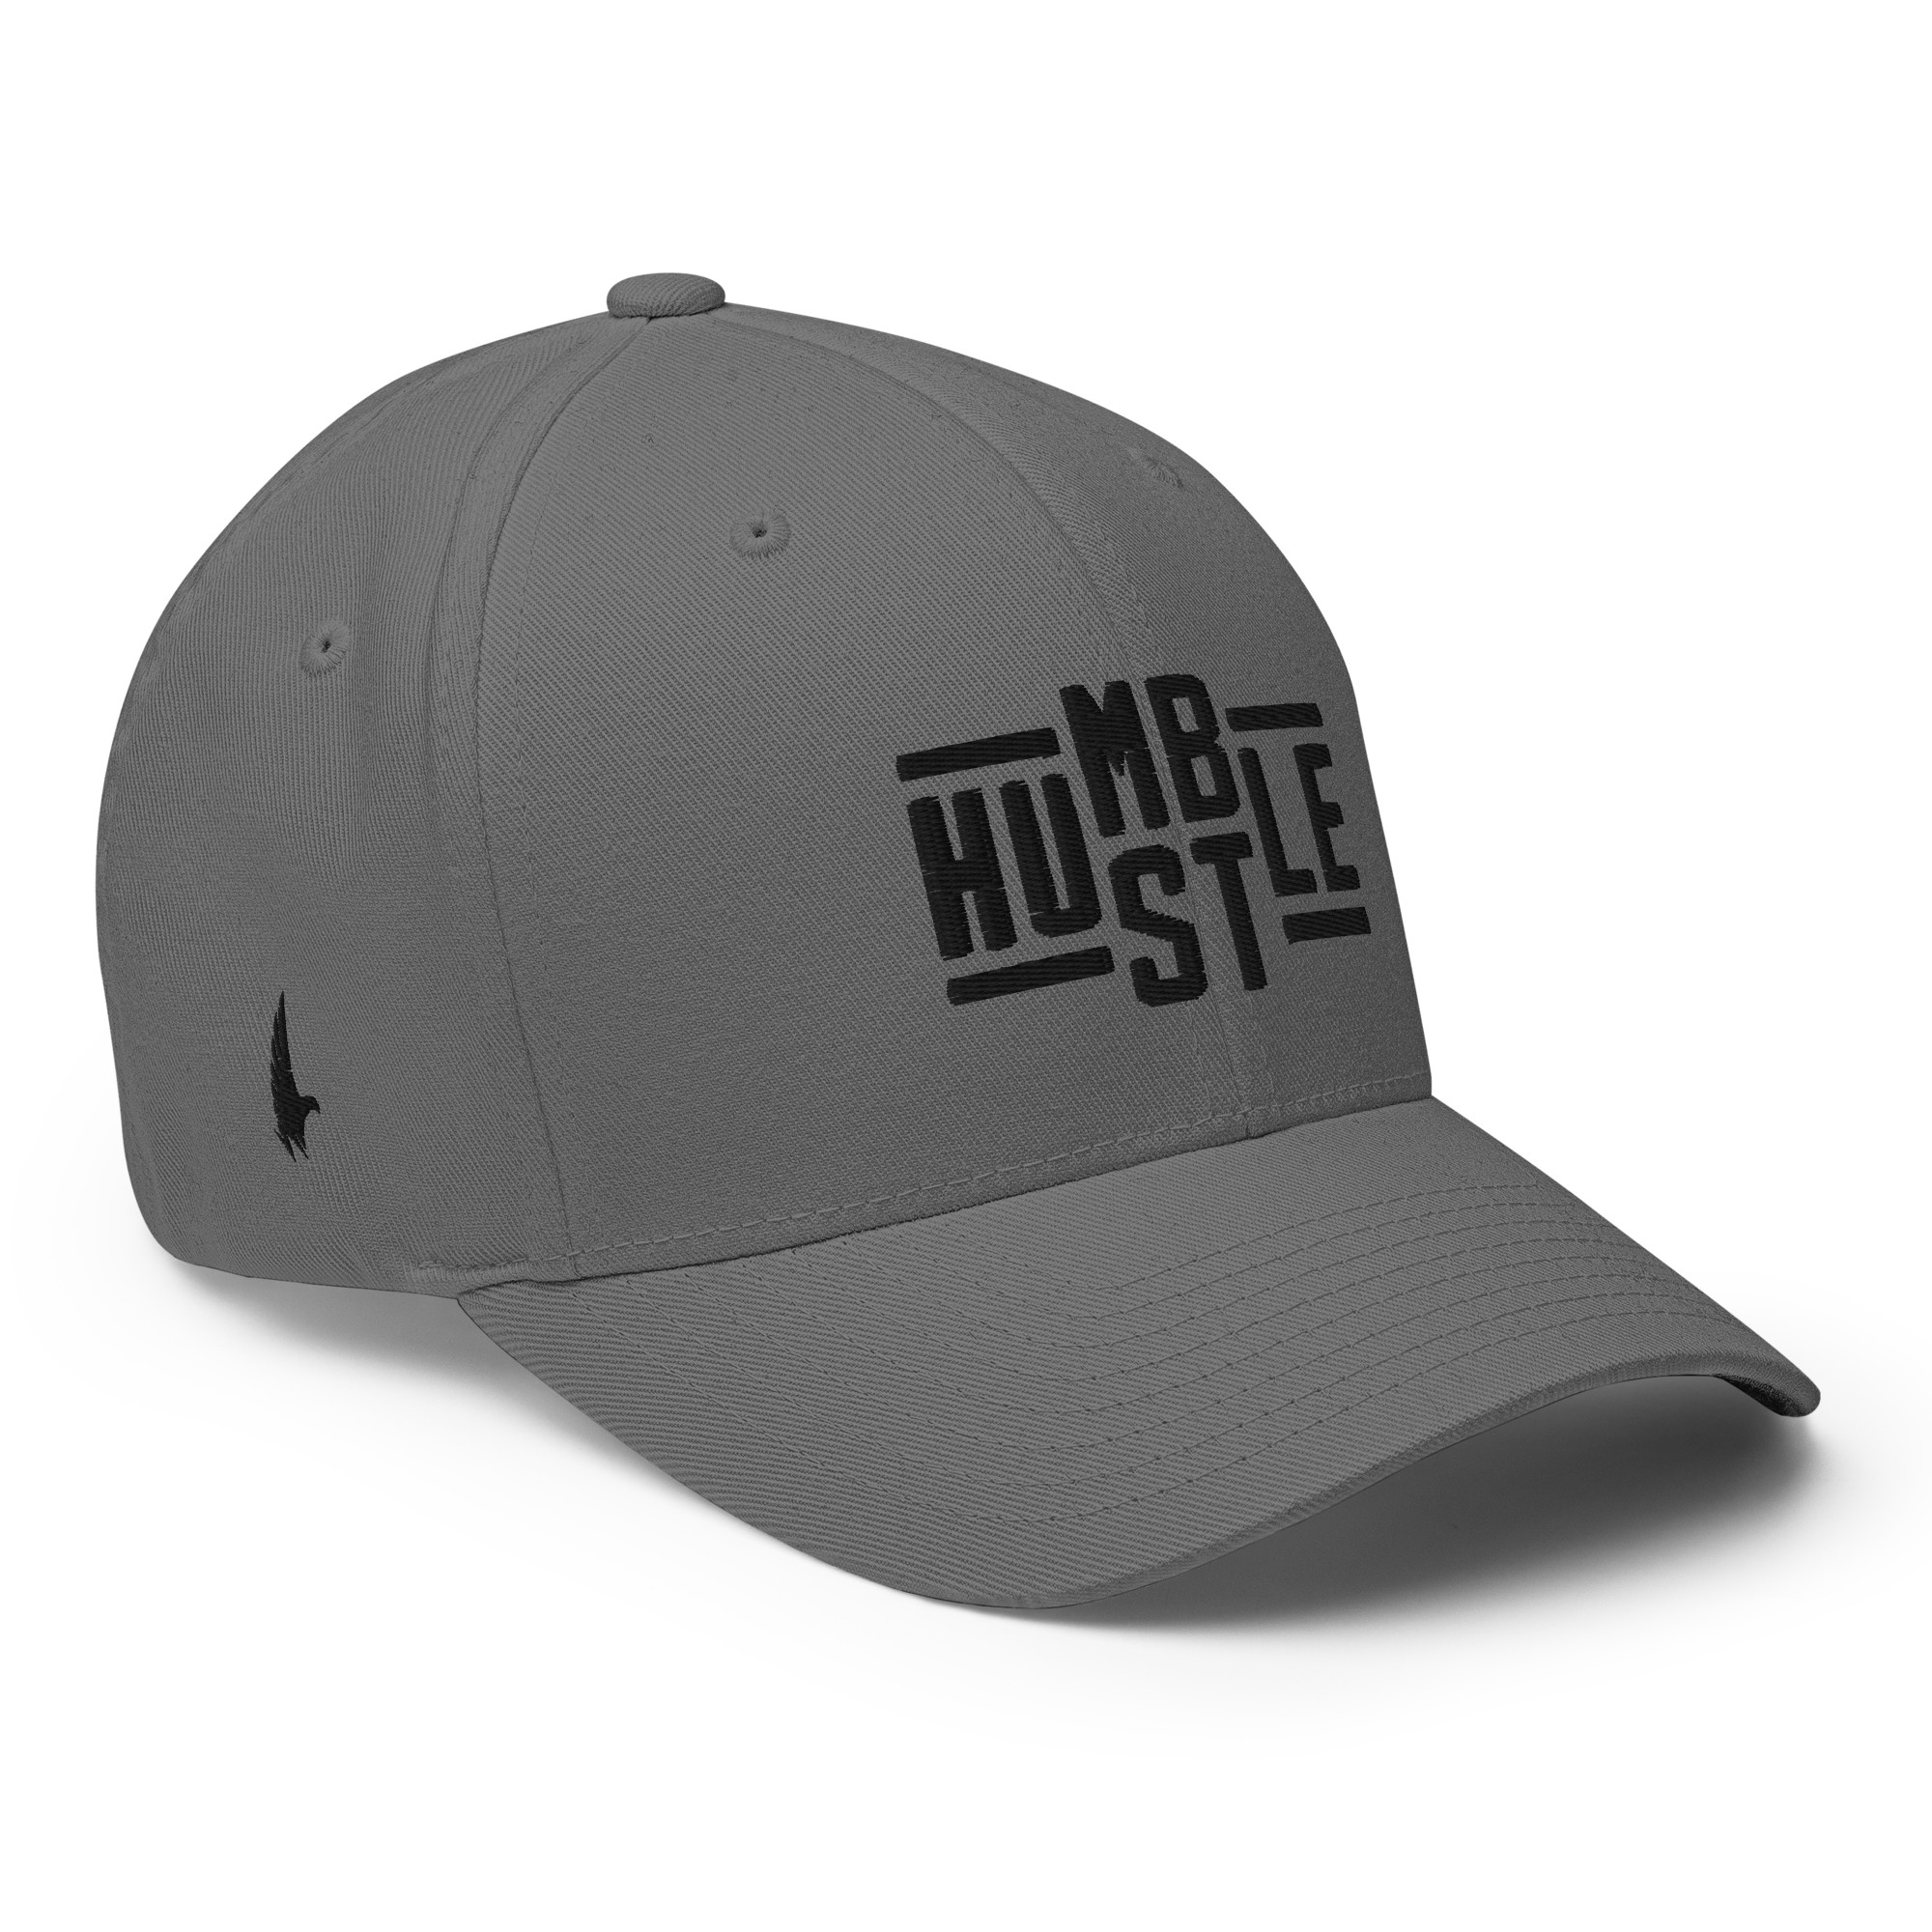 Loyalty Vibes Hustle Fitted Hat - Gray / Black Fitted - Loyalty Vibes